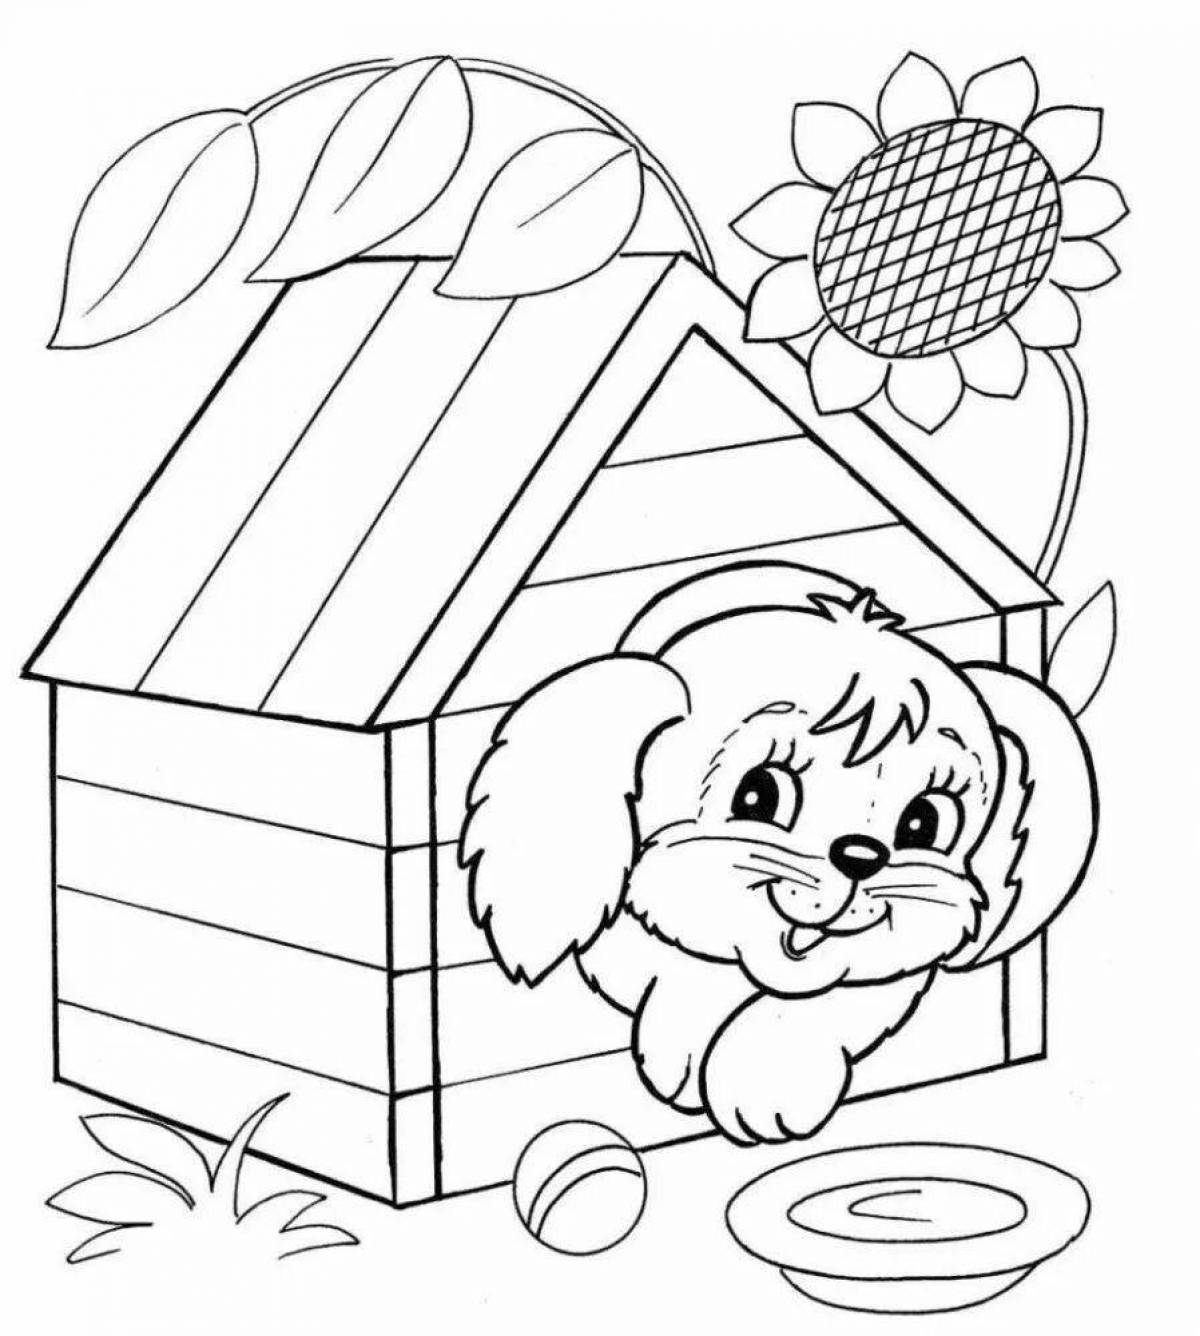 Coloring page magic dog house